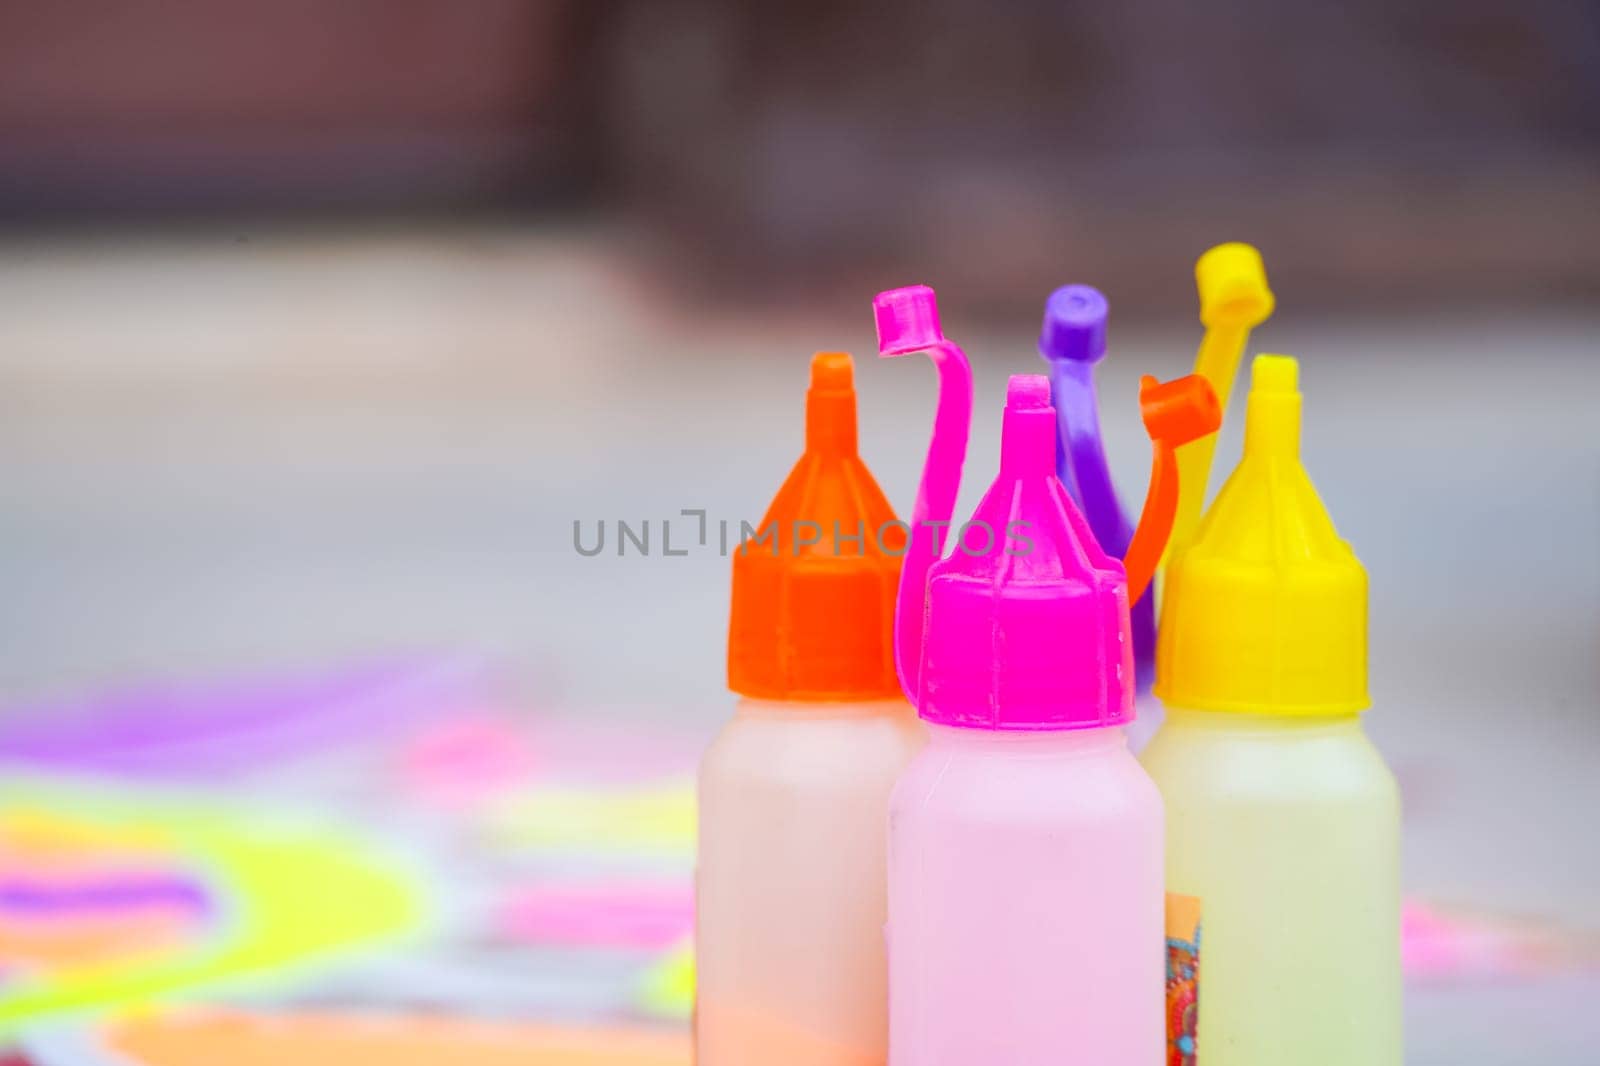 bottle of color powder used to make a rangoli a traditional art made on floors during festivals of diwali, dussera, onam in hindu culture by Shalinimathur